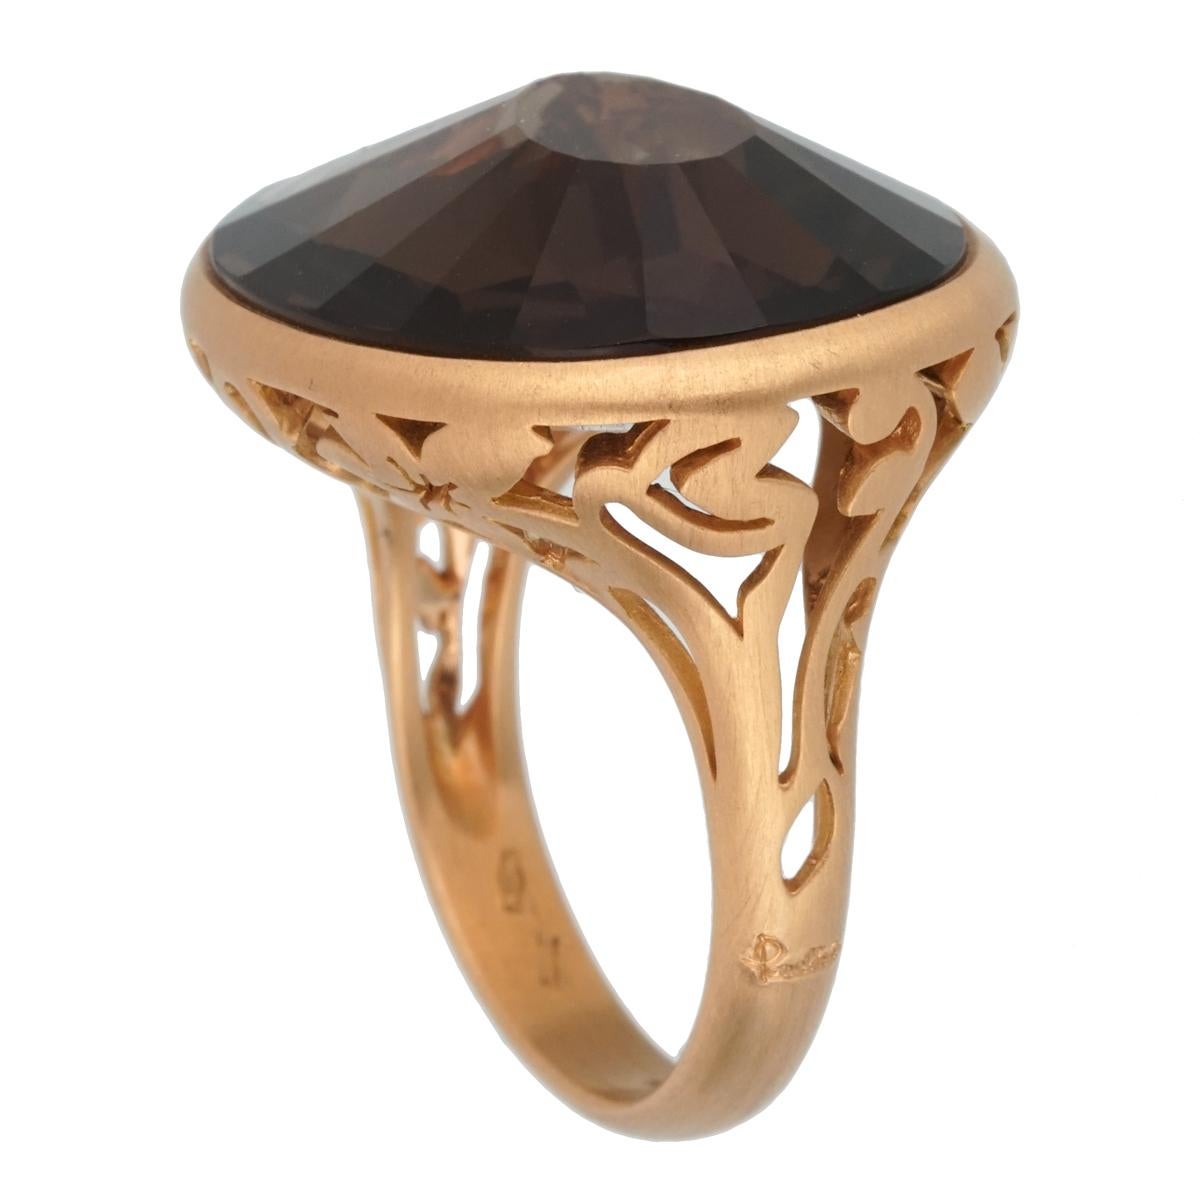 A chic brand new Pomellato cocktail ring showcasing a 10.19ct Smoky Quartz set in 18k rose gold. The ring measures a size 6.5 and can be resized

Pomellato Retail: $4600
Sku: 2451